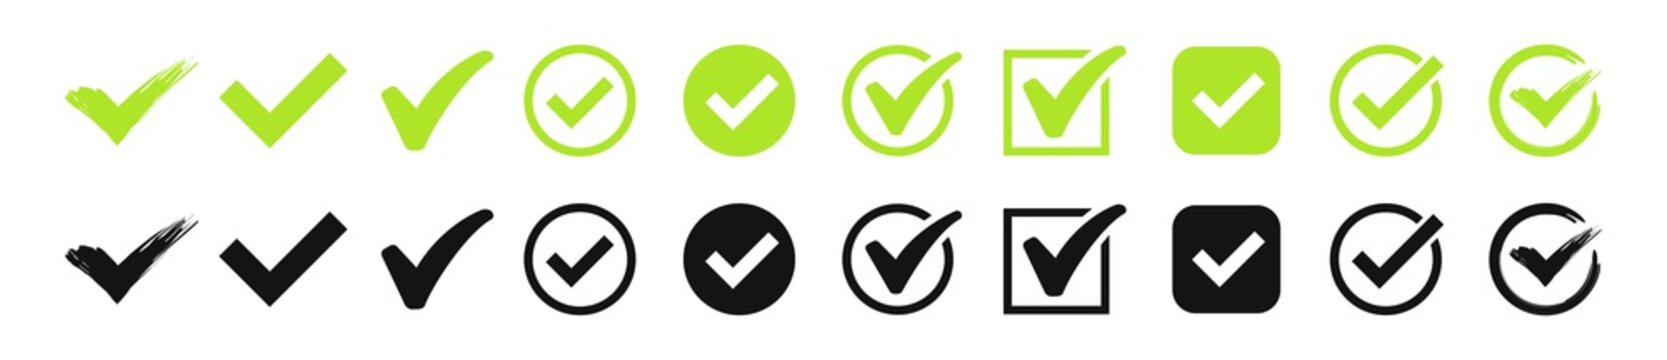 Green check mark and red cross icon set. Circle and square. Tick symbol in green color, vector illustration.